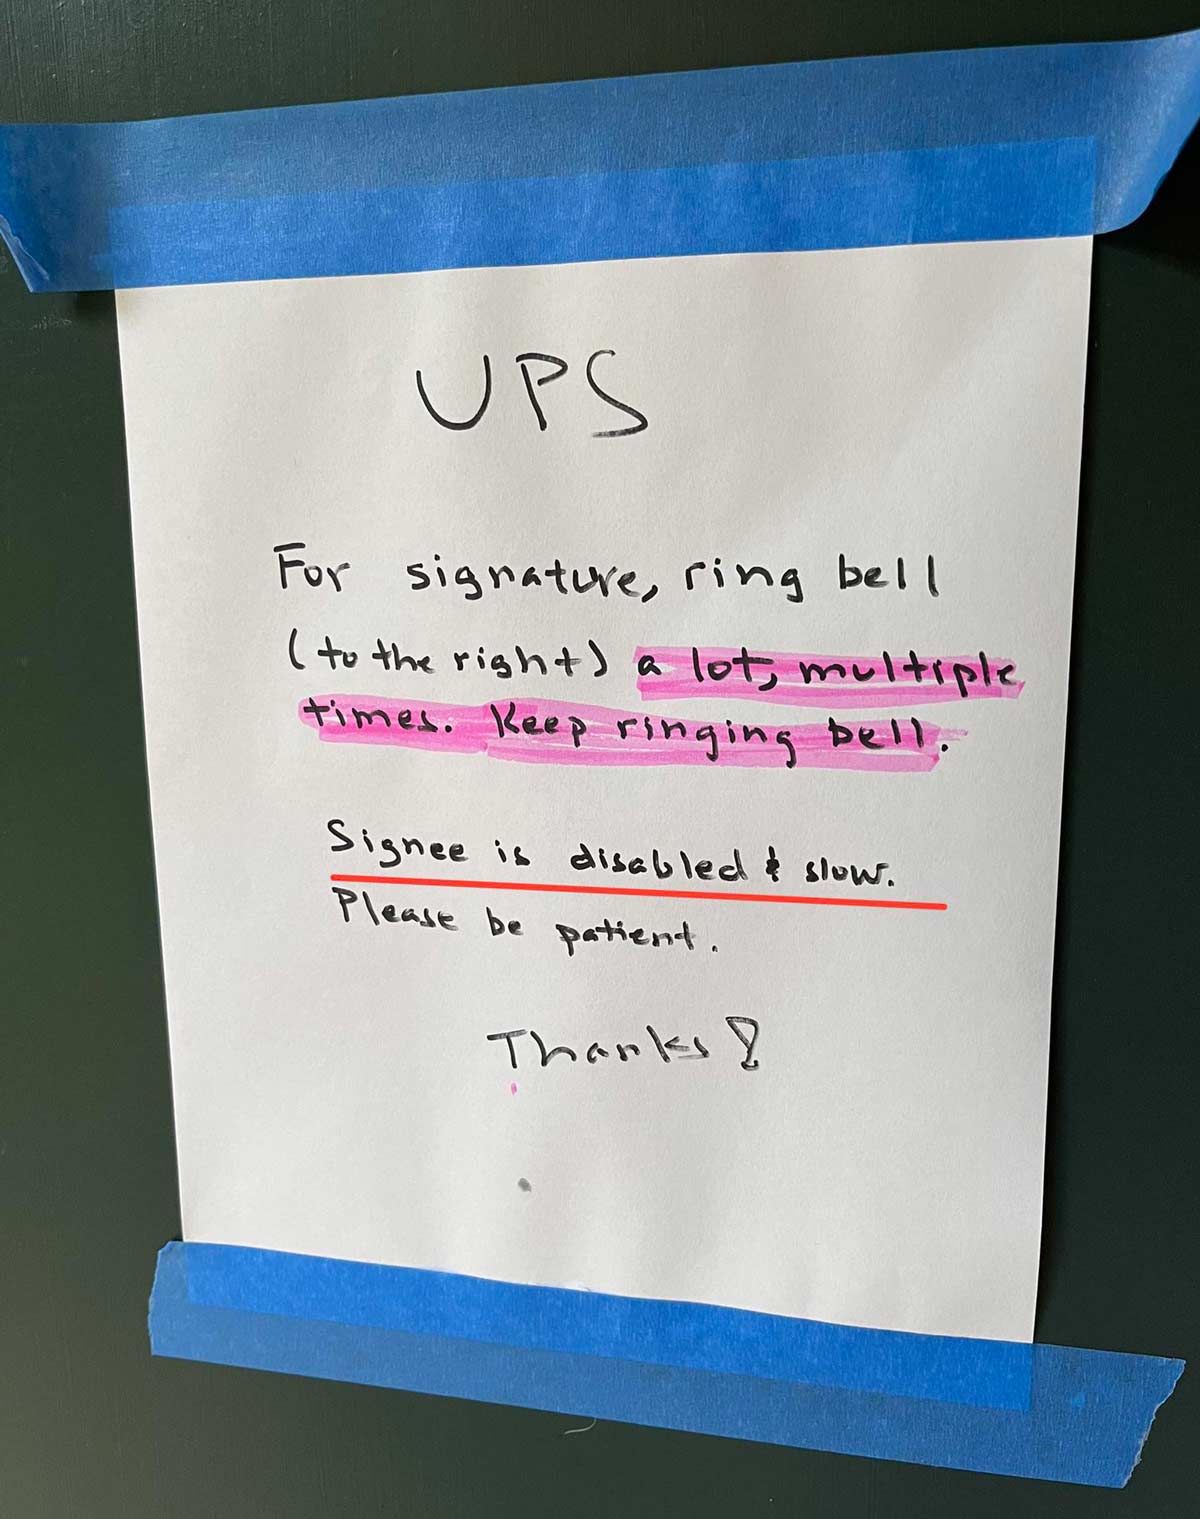 I work from home, so my dad wanted me to sign for his package. Found this sign outside our door after I signed. For the record, I am not disabled